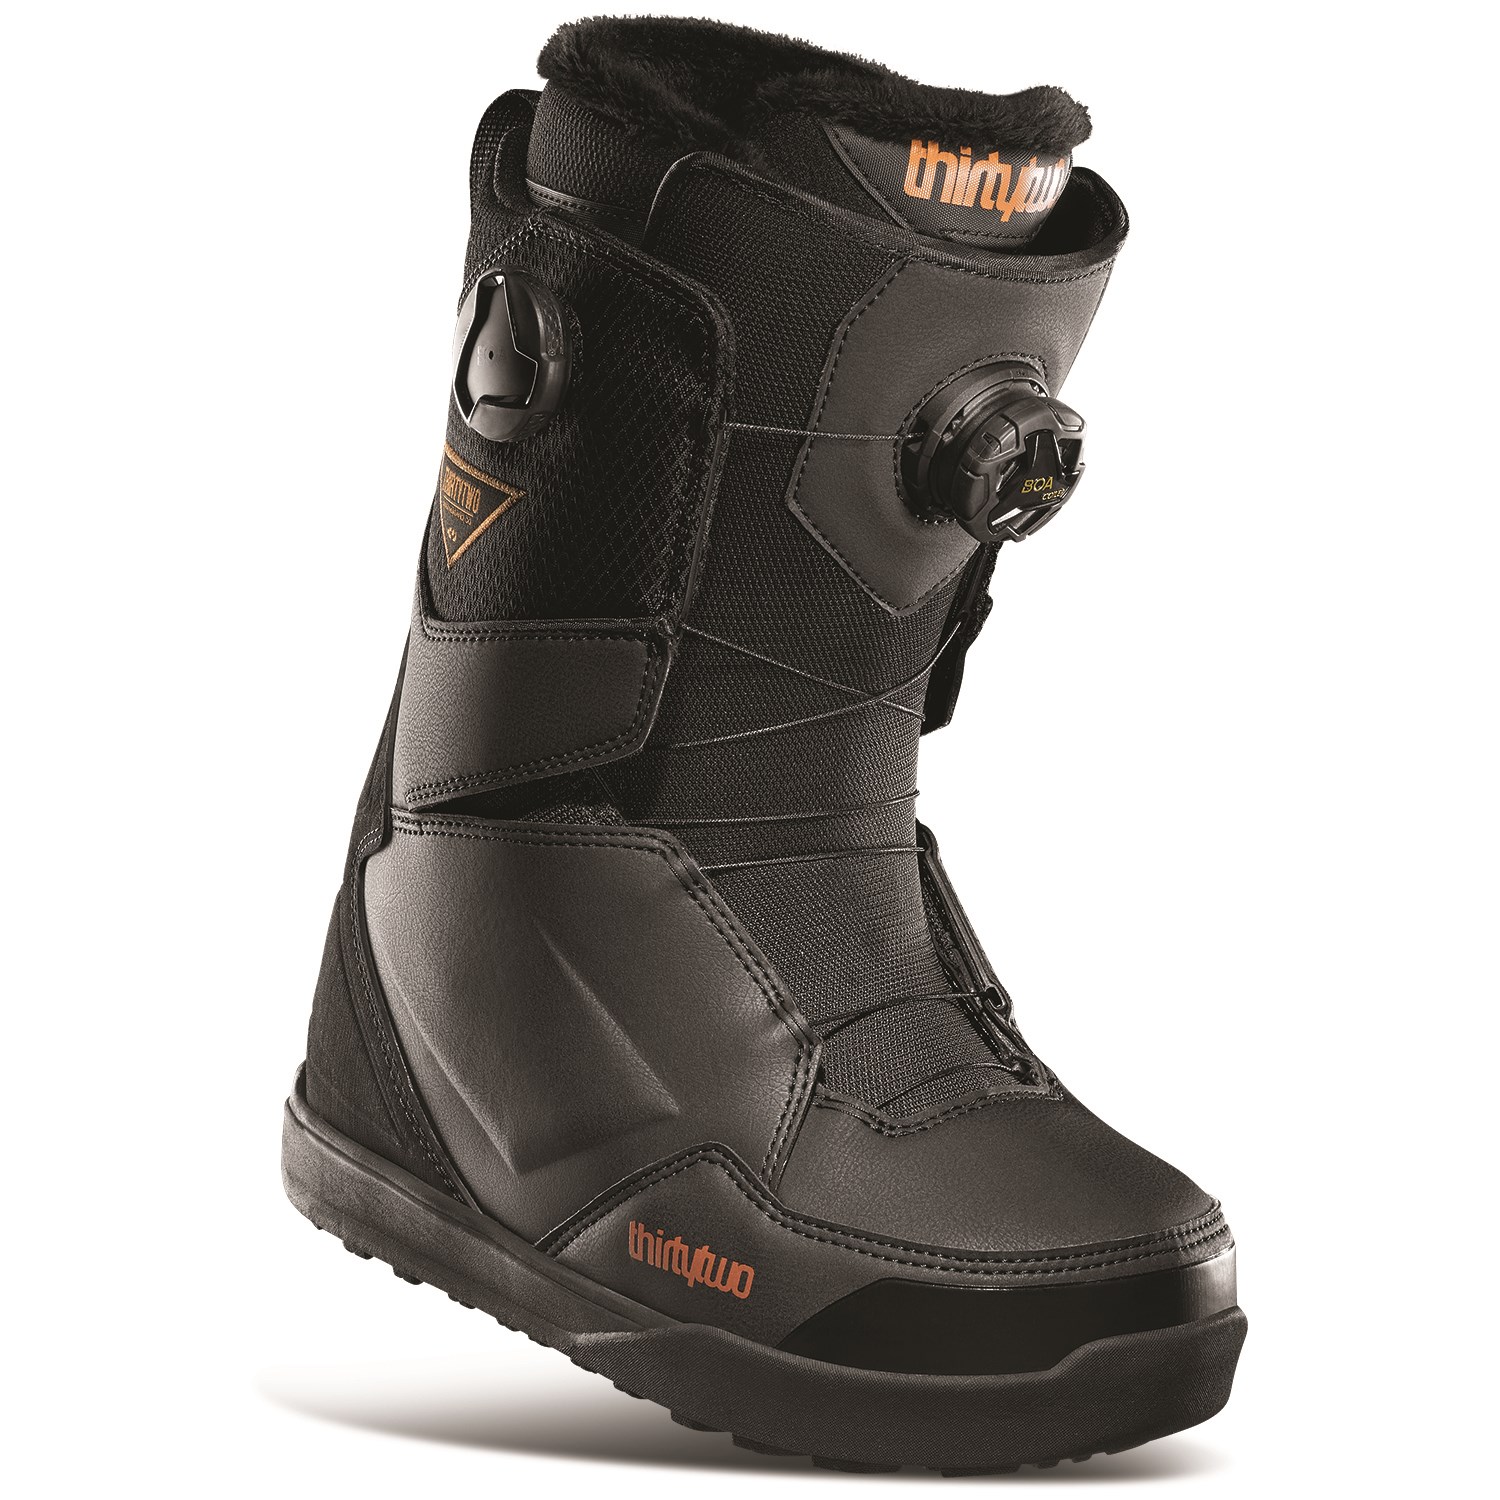 ThirtyTwo Lashed Womens 18 Snowboard Boots